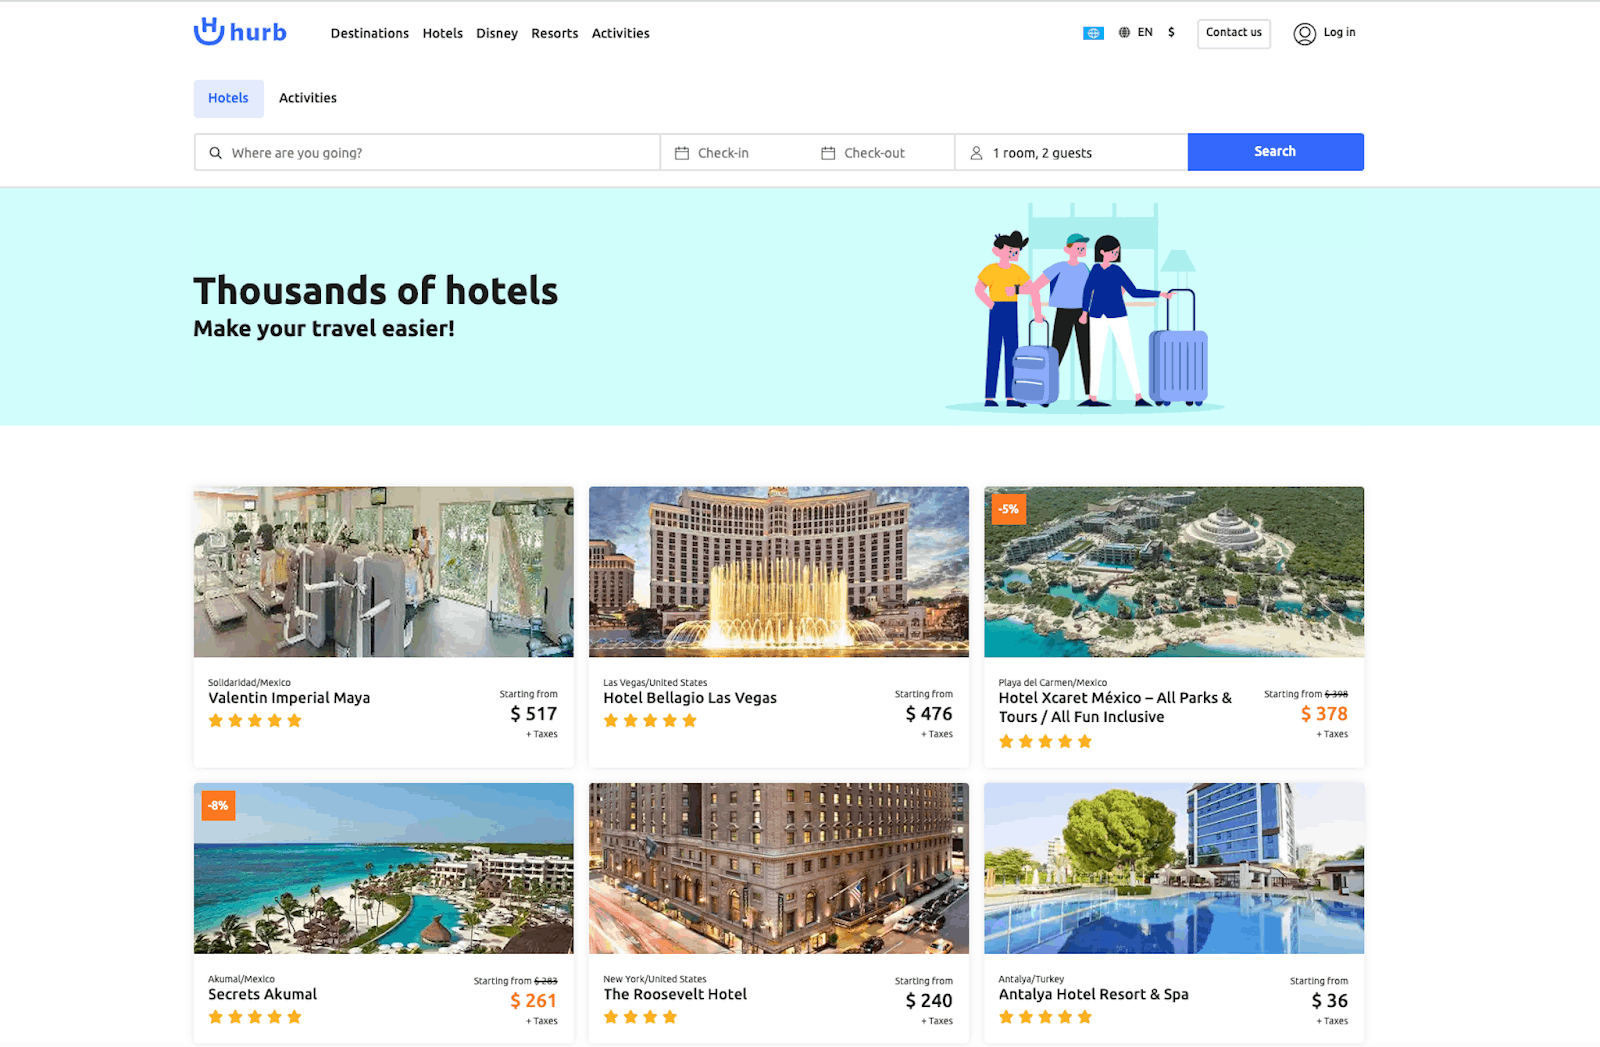 Hurb App - Search for Hotels, Travels and More